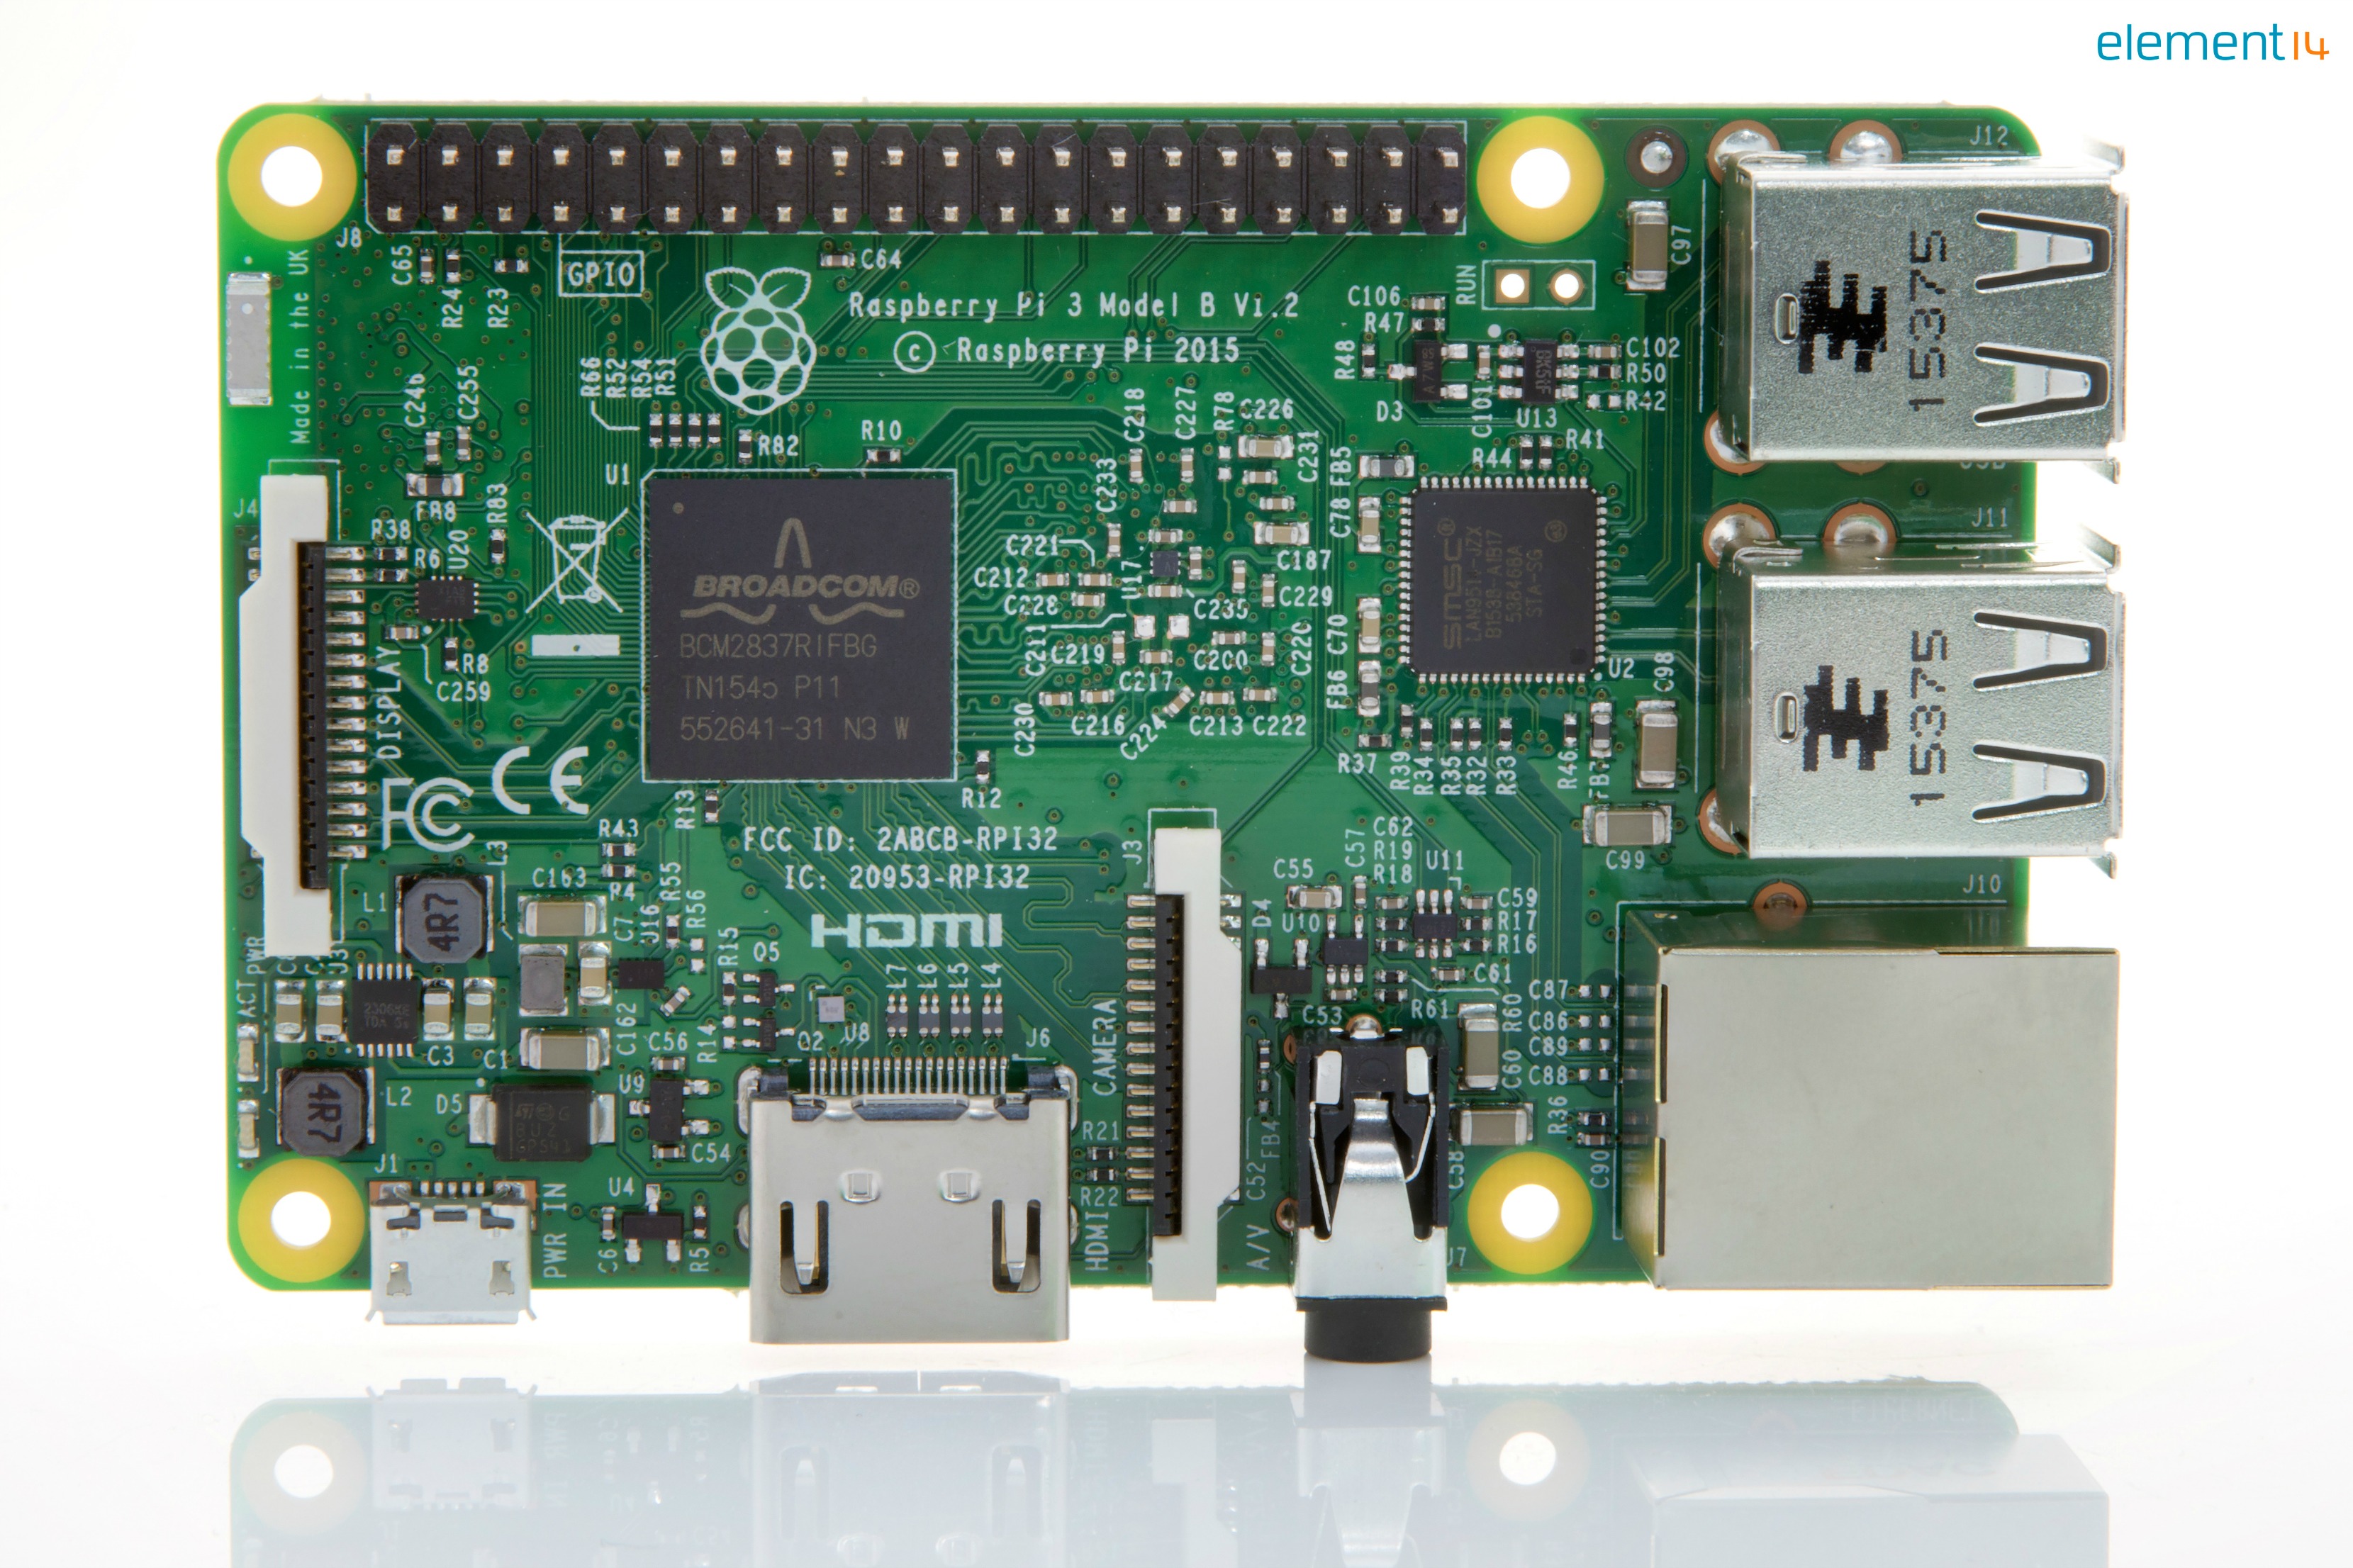 Raspberry Pi 3 announced with with built-in wireless LAN and Bluetooth ...
